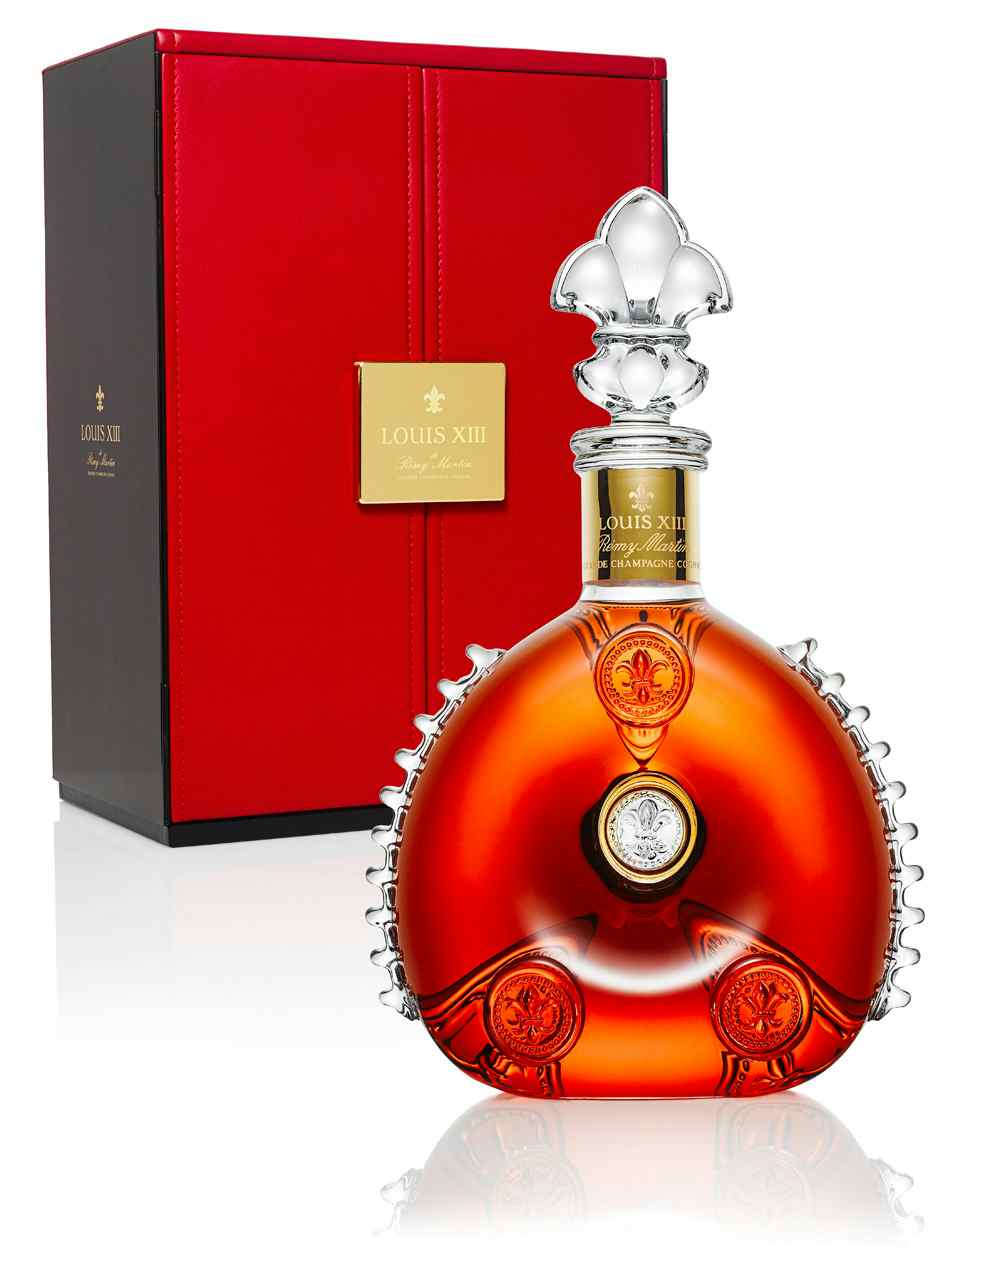 LOUIS XIII: The Magnum Decanter